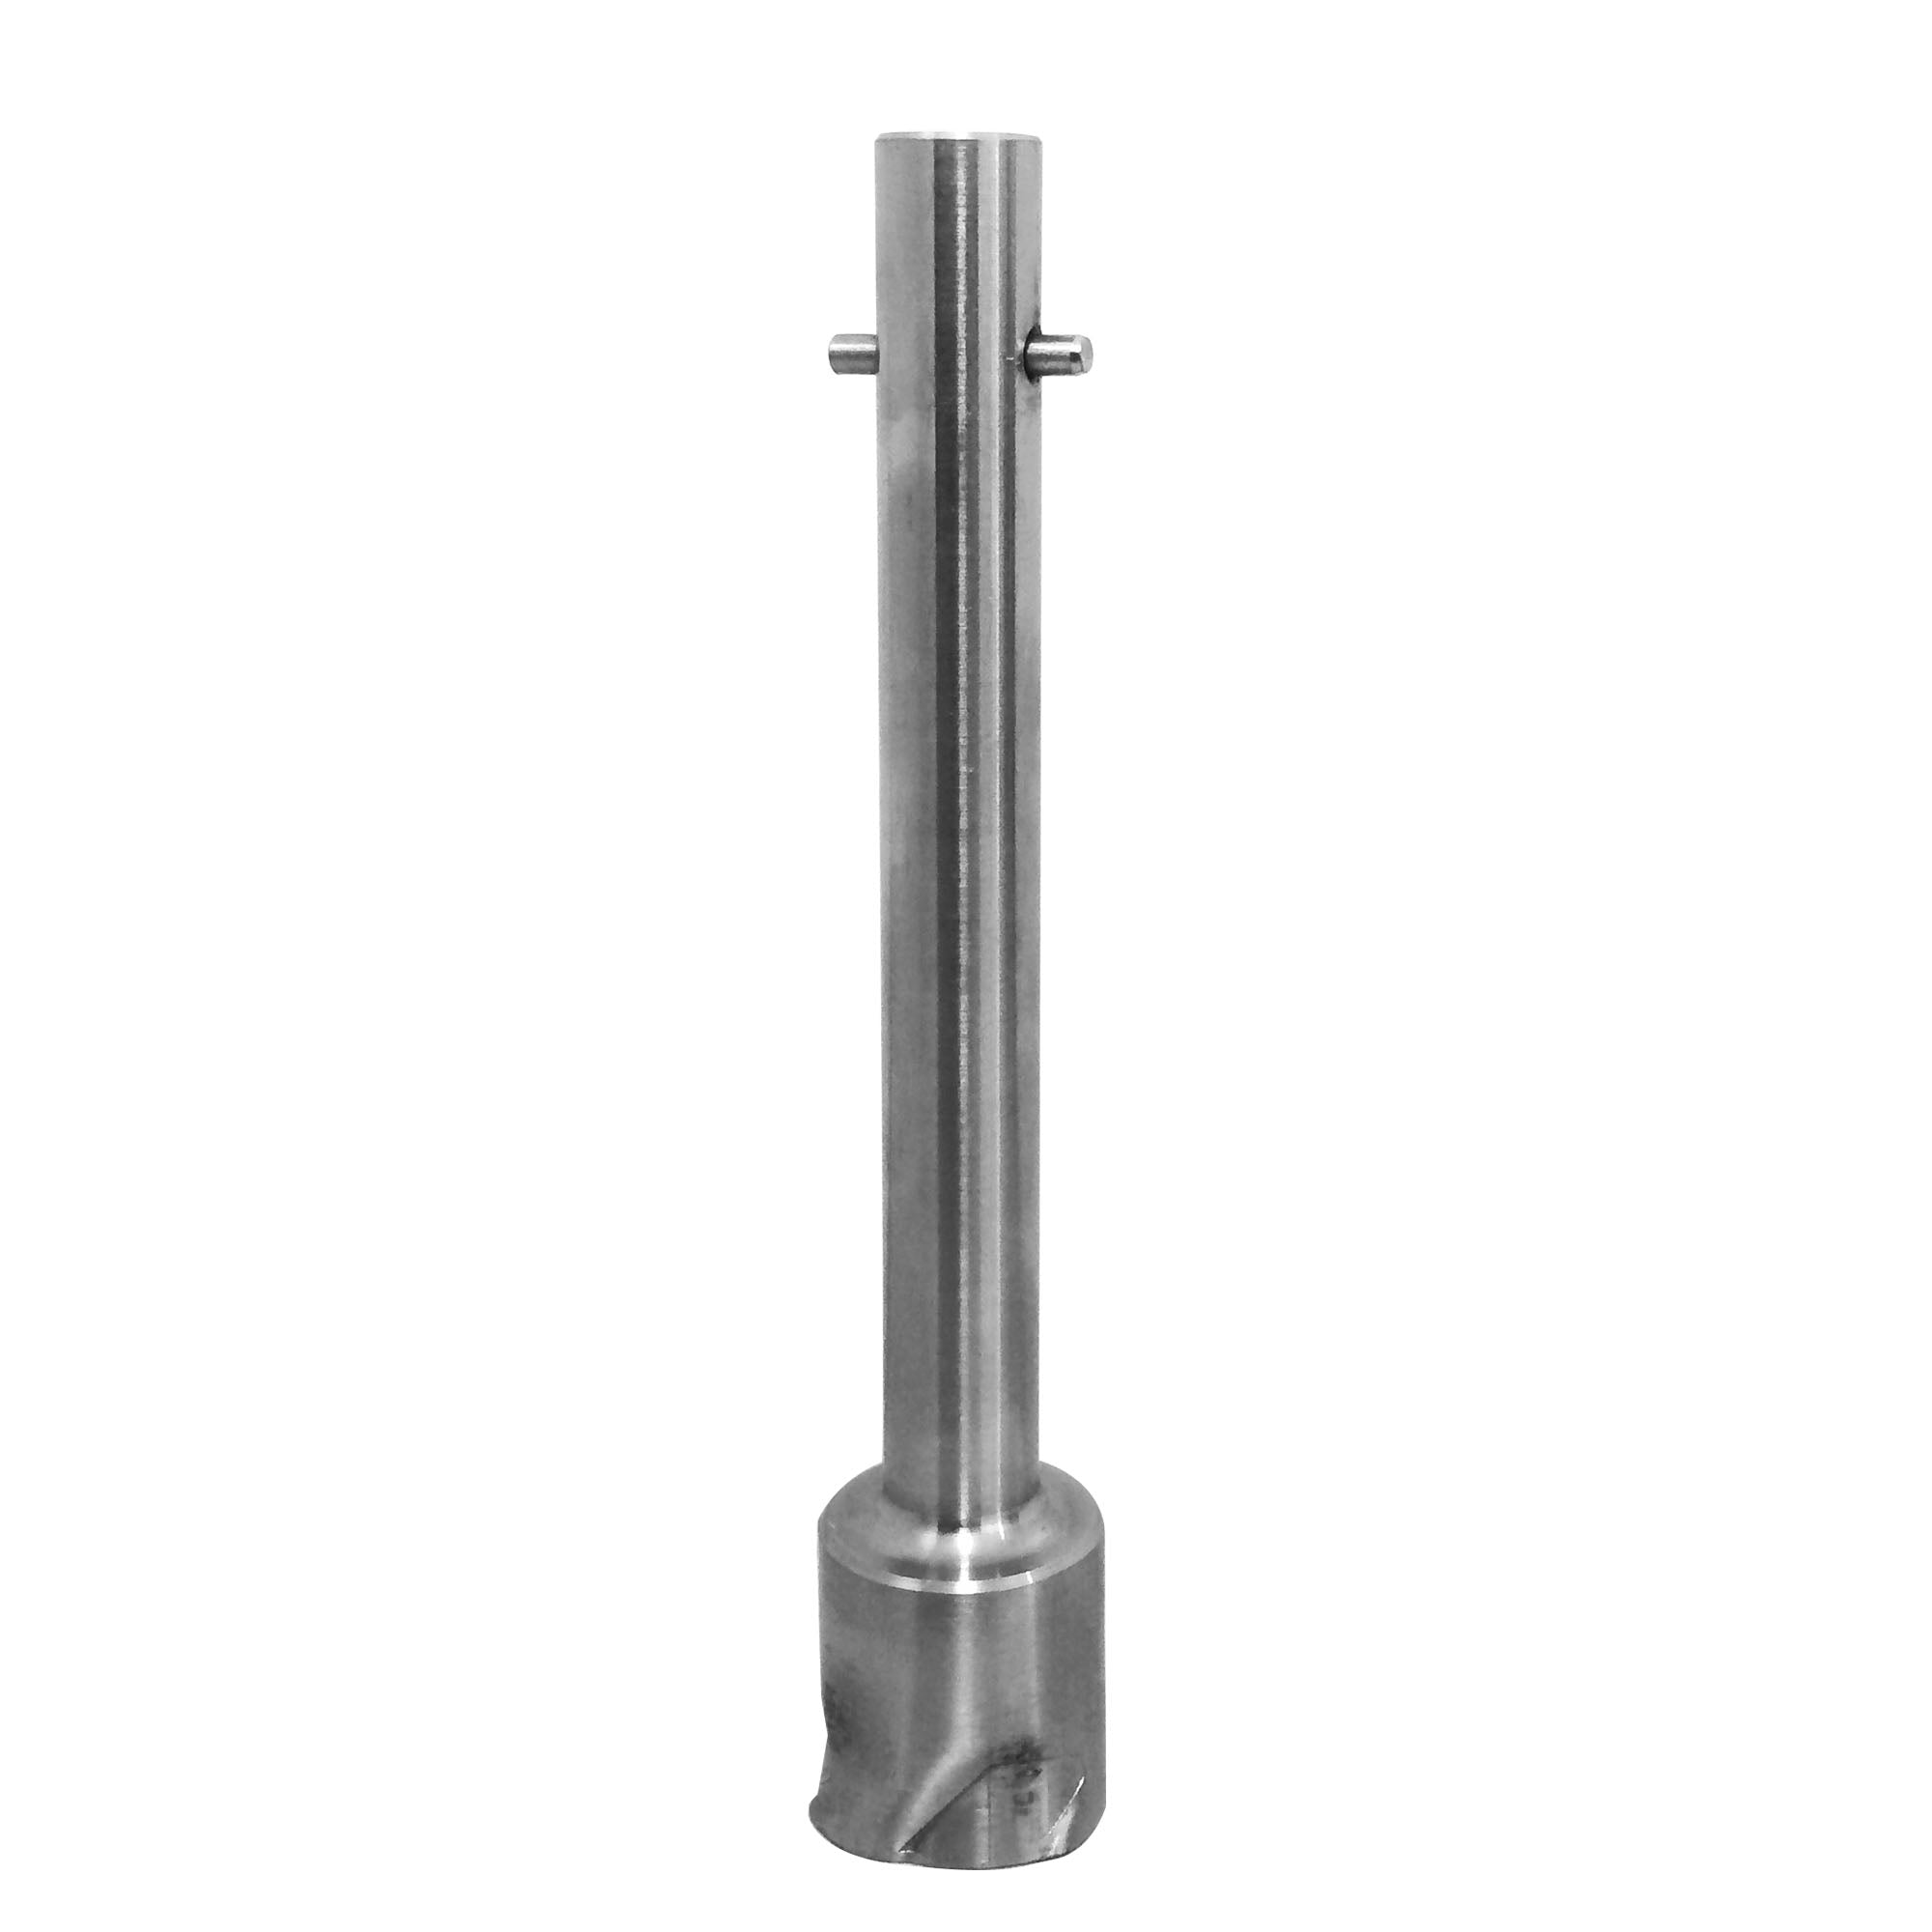 Flour Sifter Drive Shaft for Bowl Without Center Column